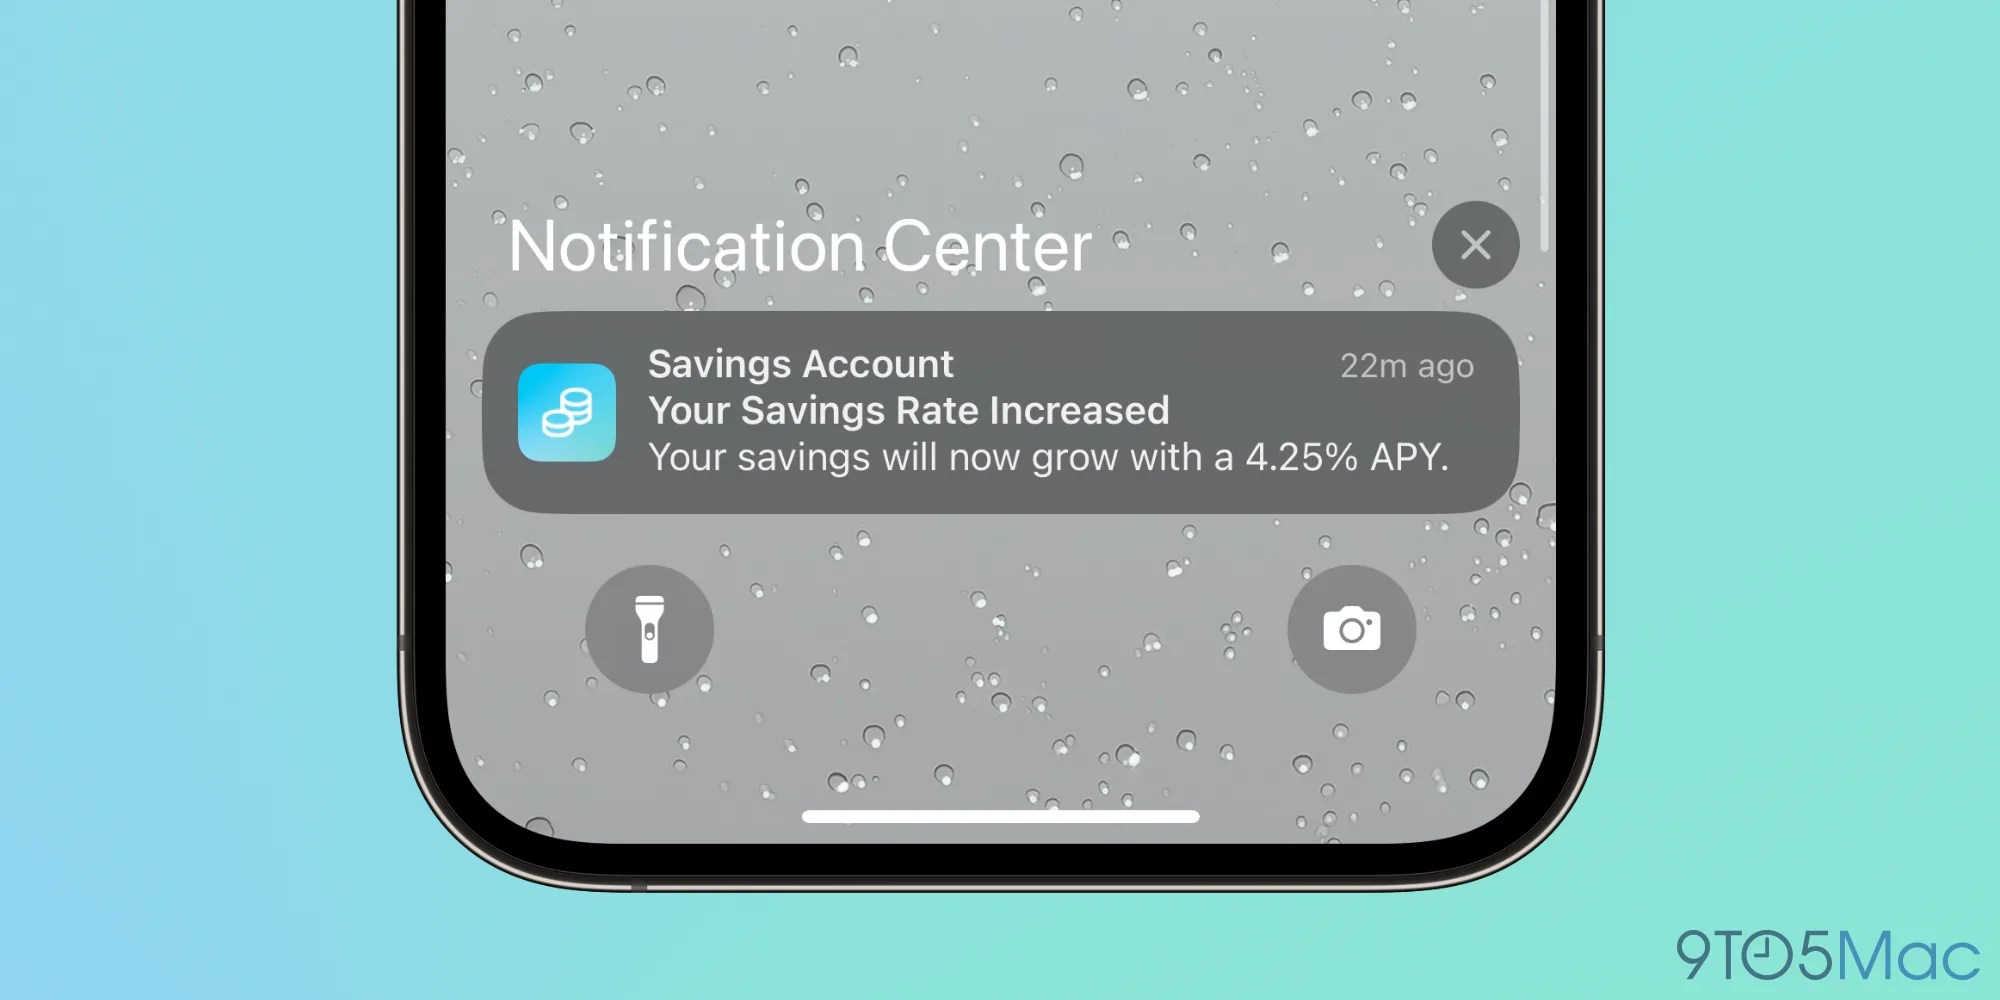 Apple Card's new high-yield Savings account is now available